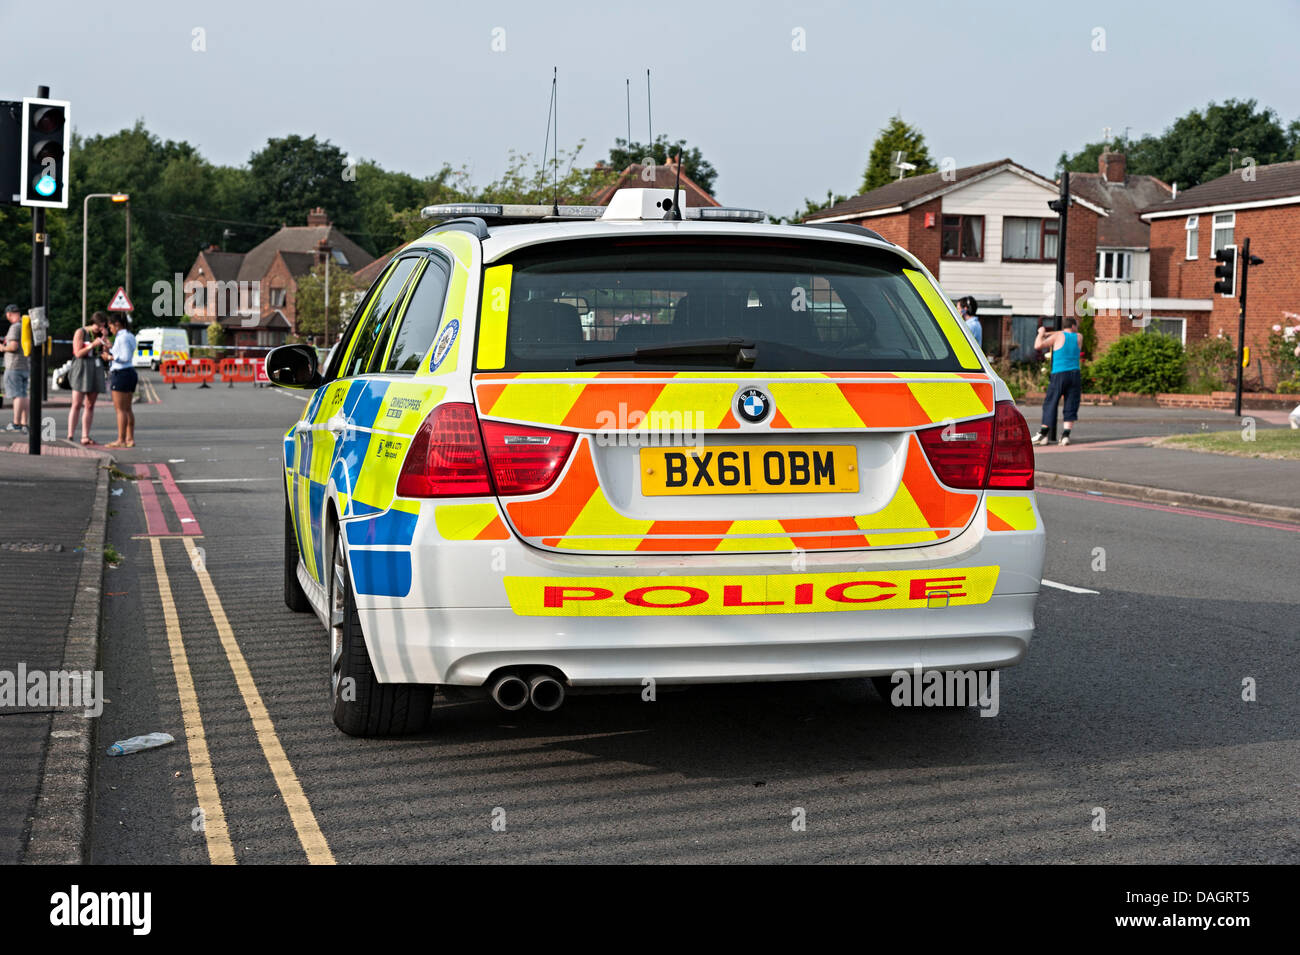 Tipton, West Midlands, UK. 12th July 2013. Mosque nail bomb Credit:  i4images/Alamy Live News a bmw fast response car Stock Photo